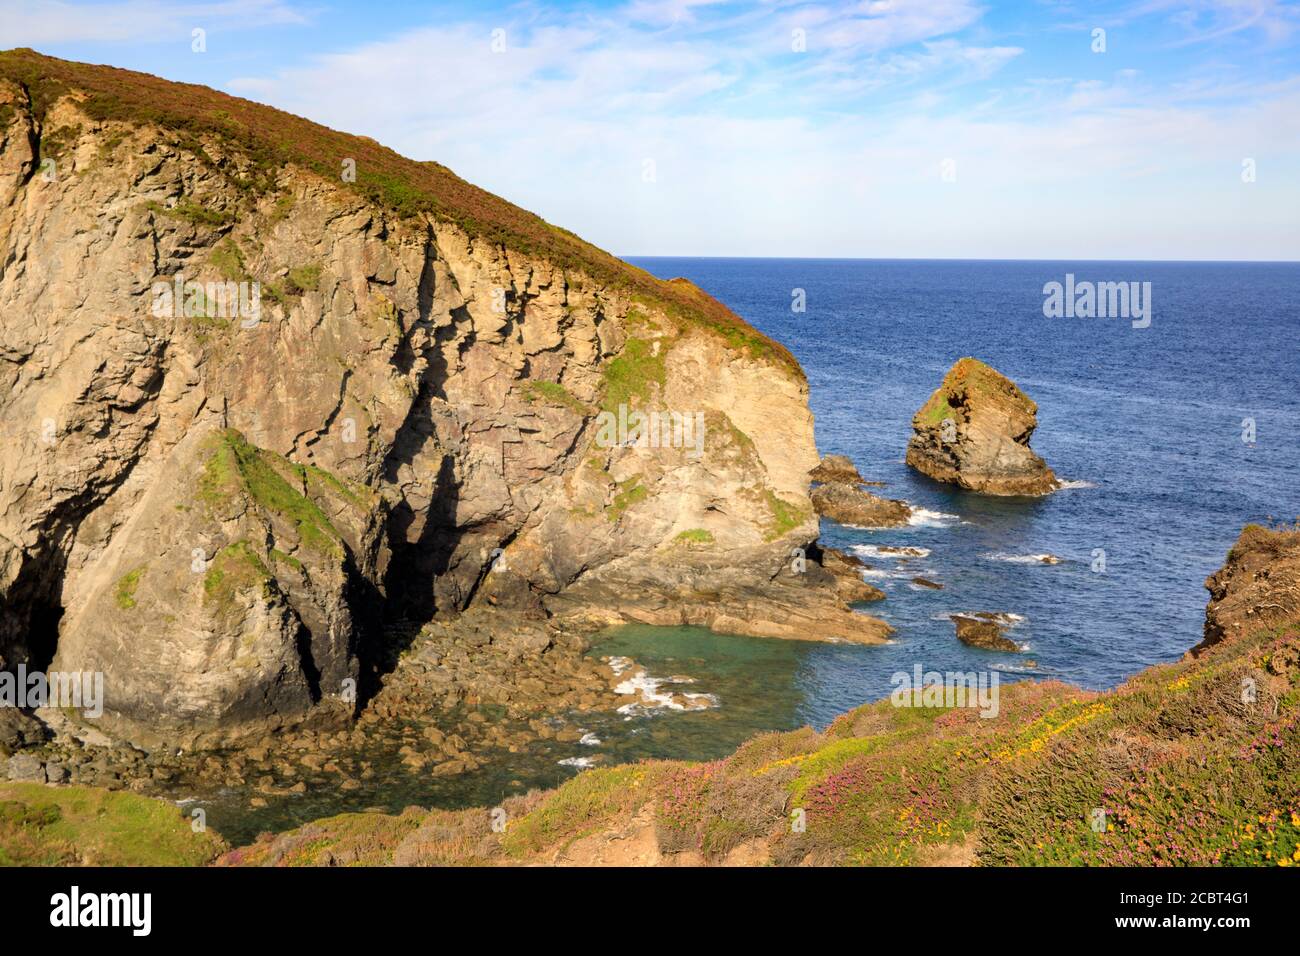 A view of Gullyn Rock from Sally's Bottom on the coast path between Porthtowan and Portreath in Cornwall. Stock Photo